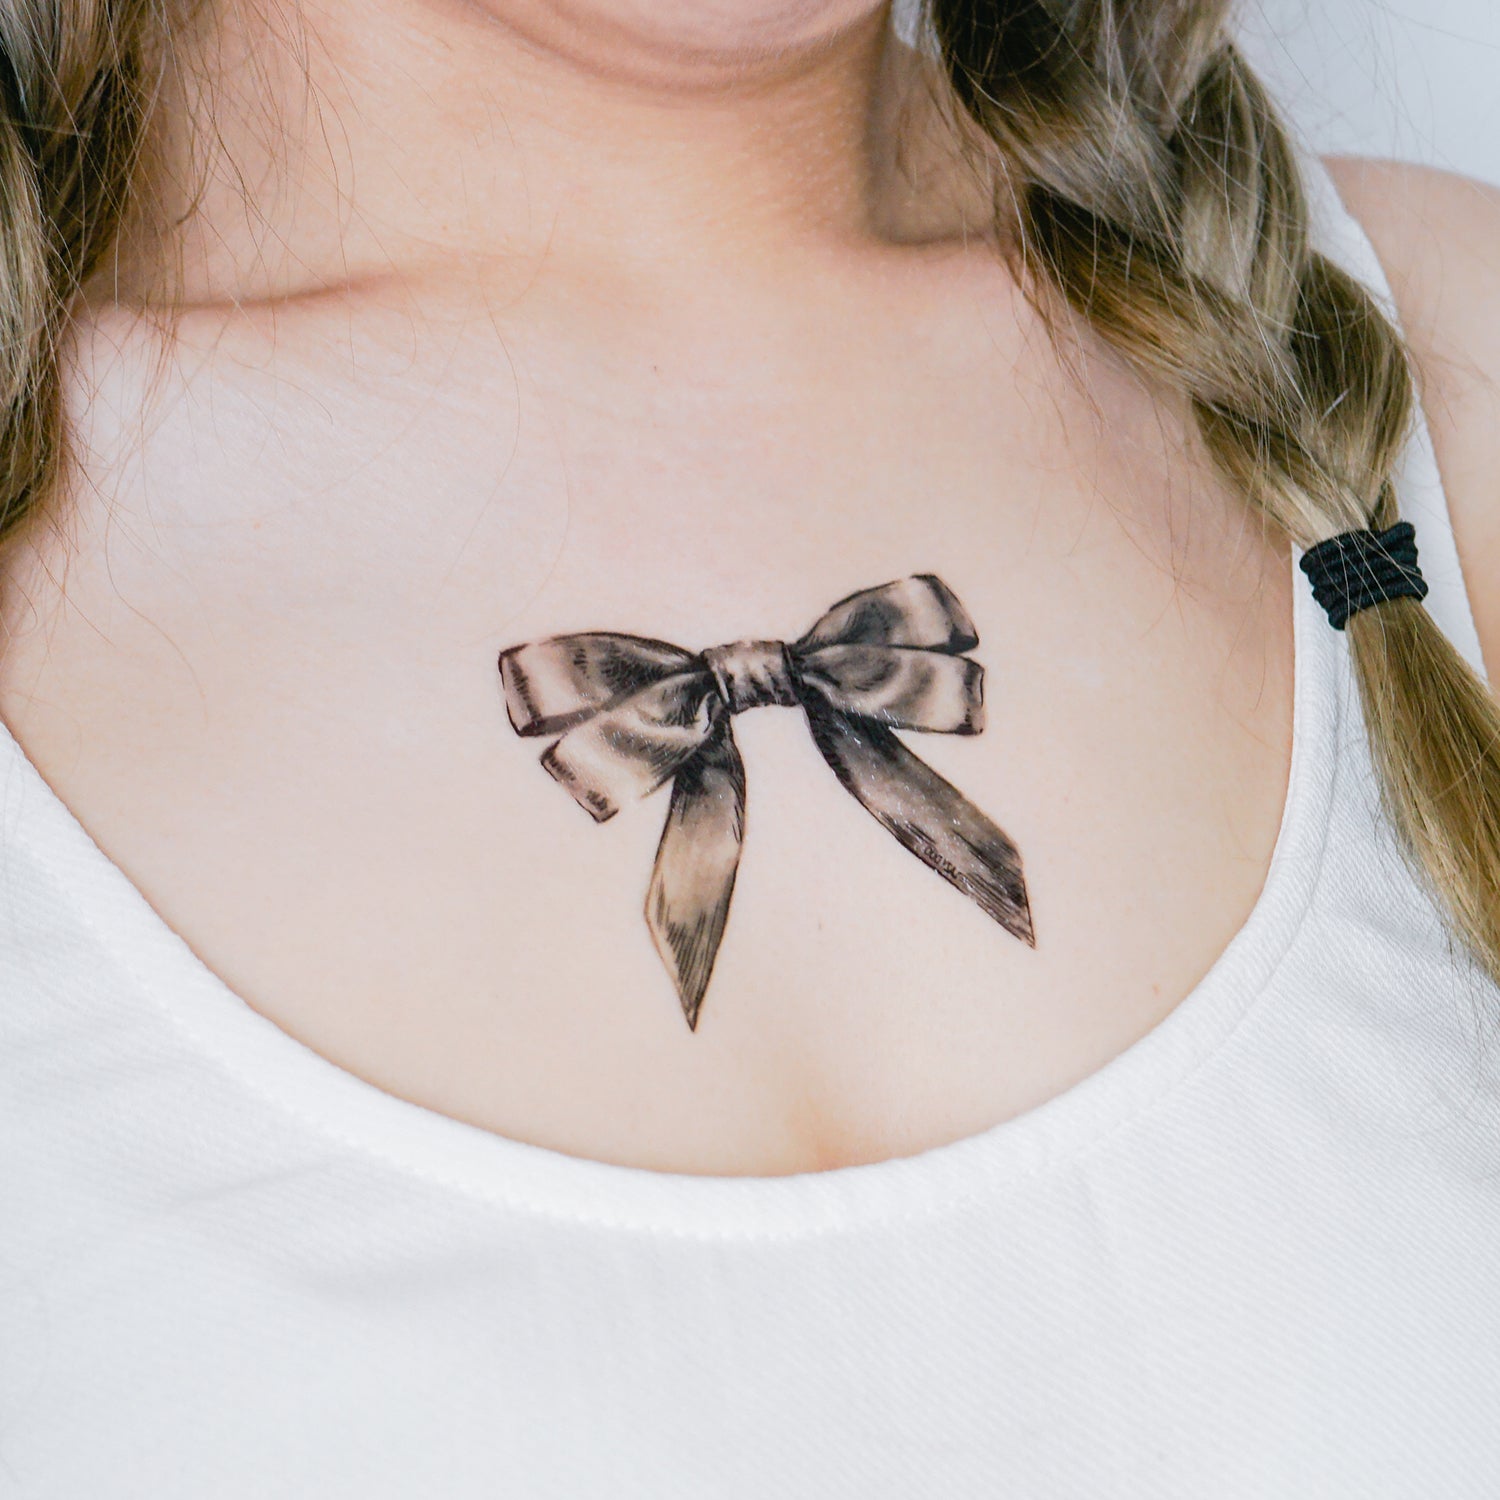 Bow Tattoos  30 Best Bow Tattoos Designs And Ideas